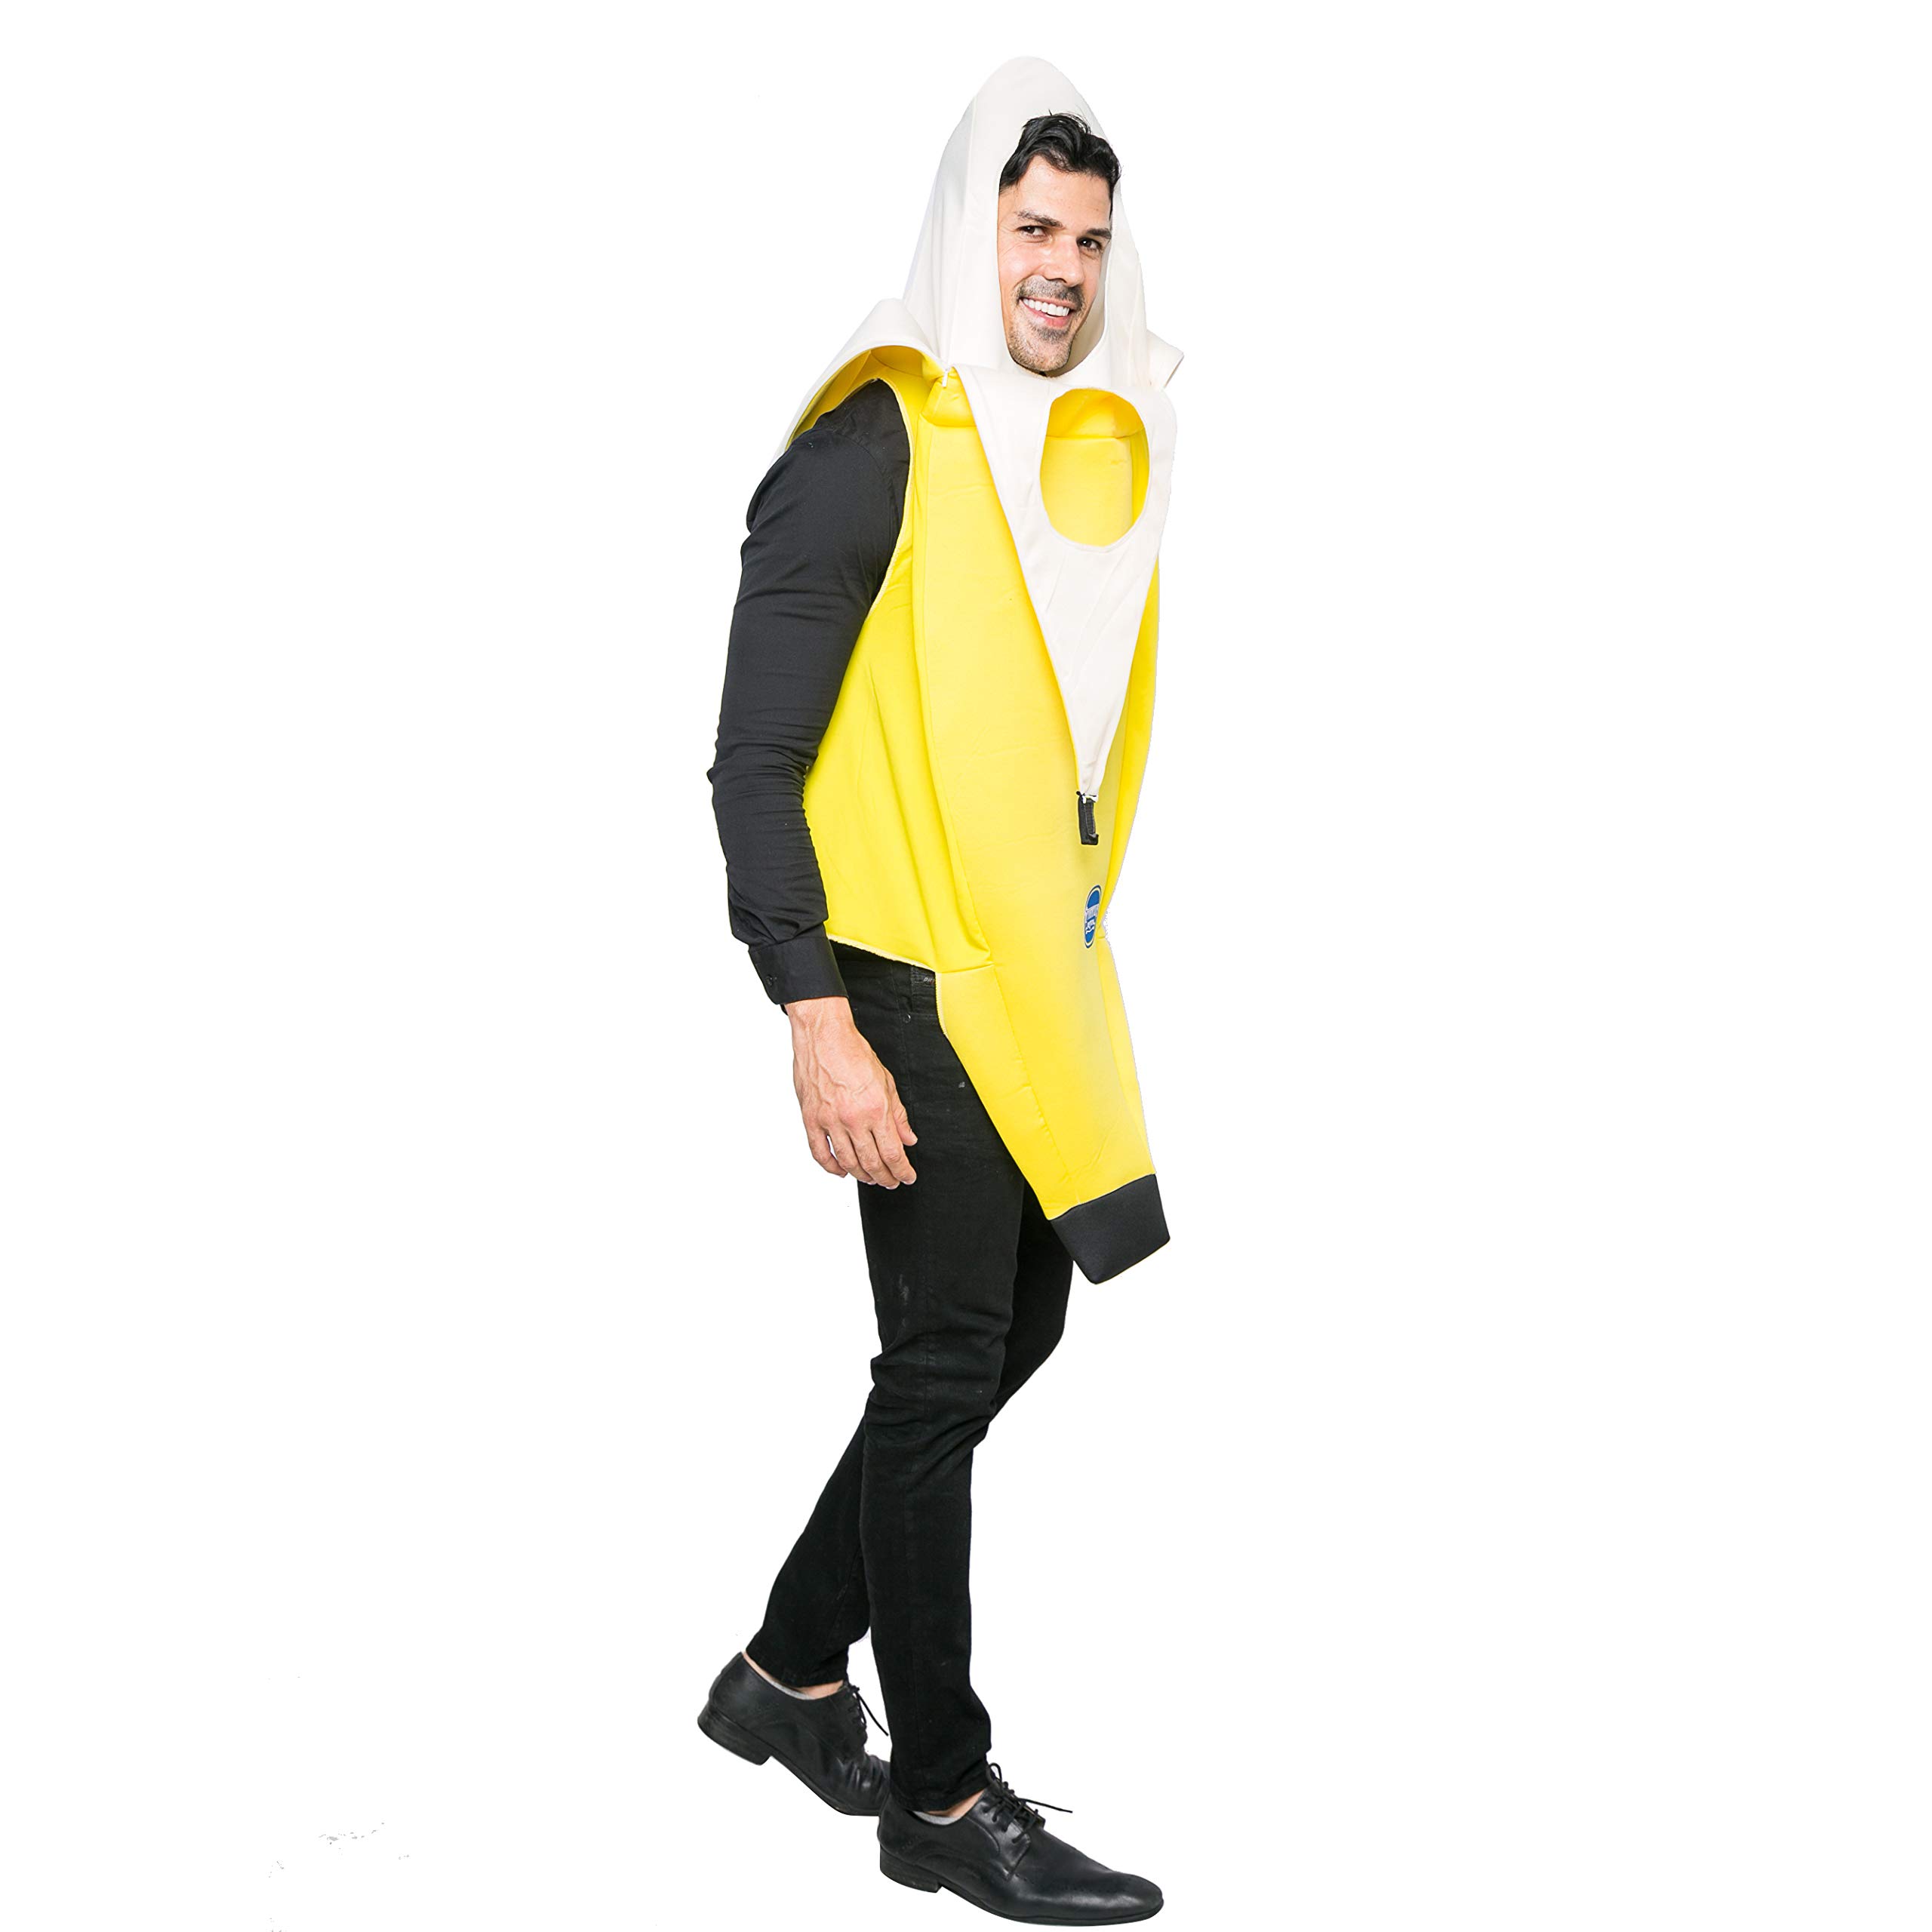 Spooktacular Creations Appealing Banana Costume Adult Set for Halloween Dress Up Party Roleplay Cosplay - image 2 of 5